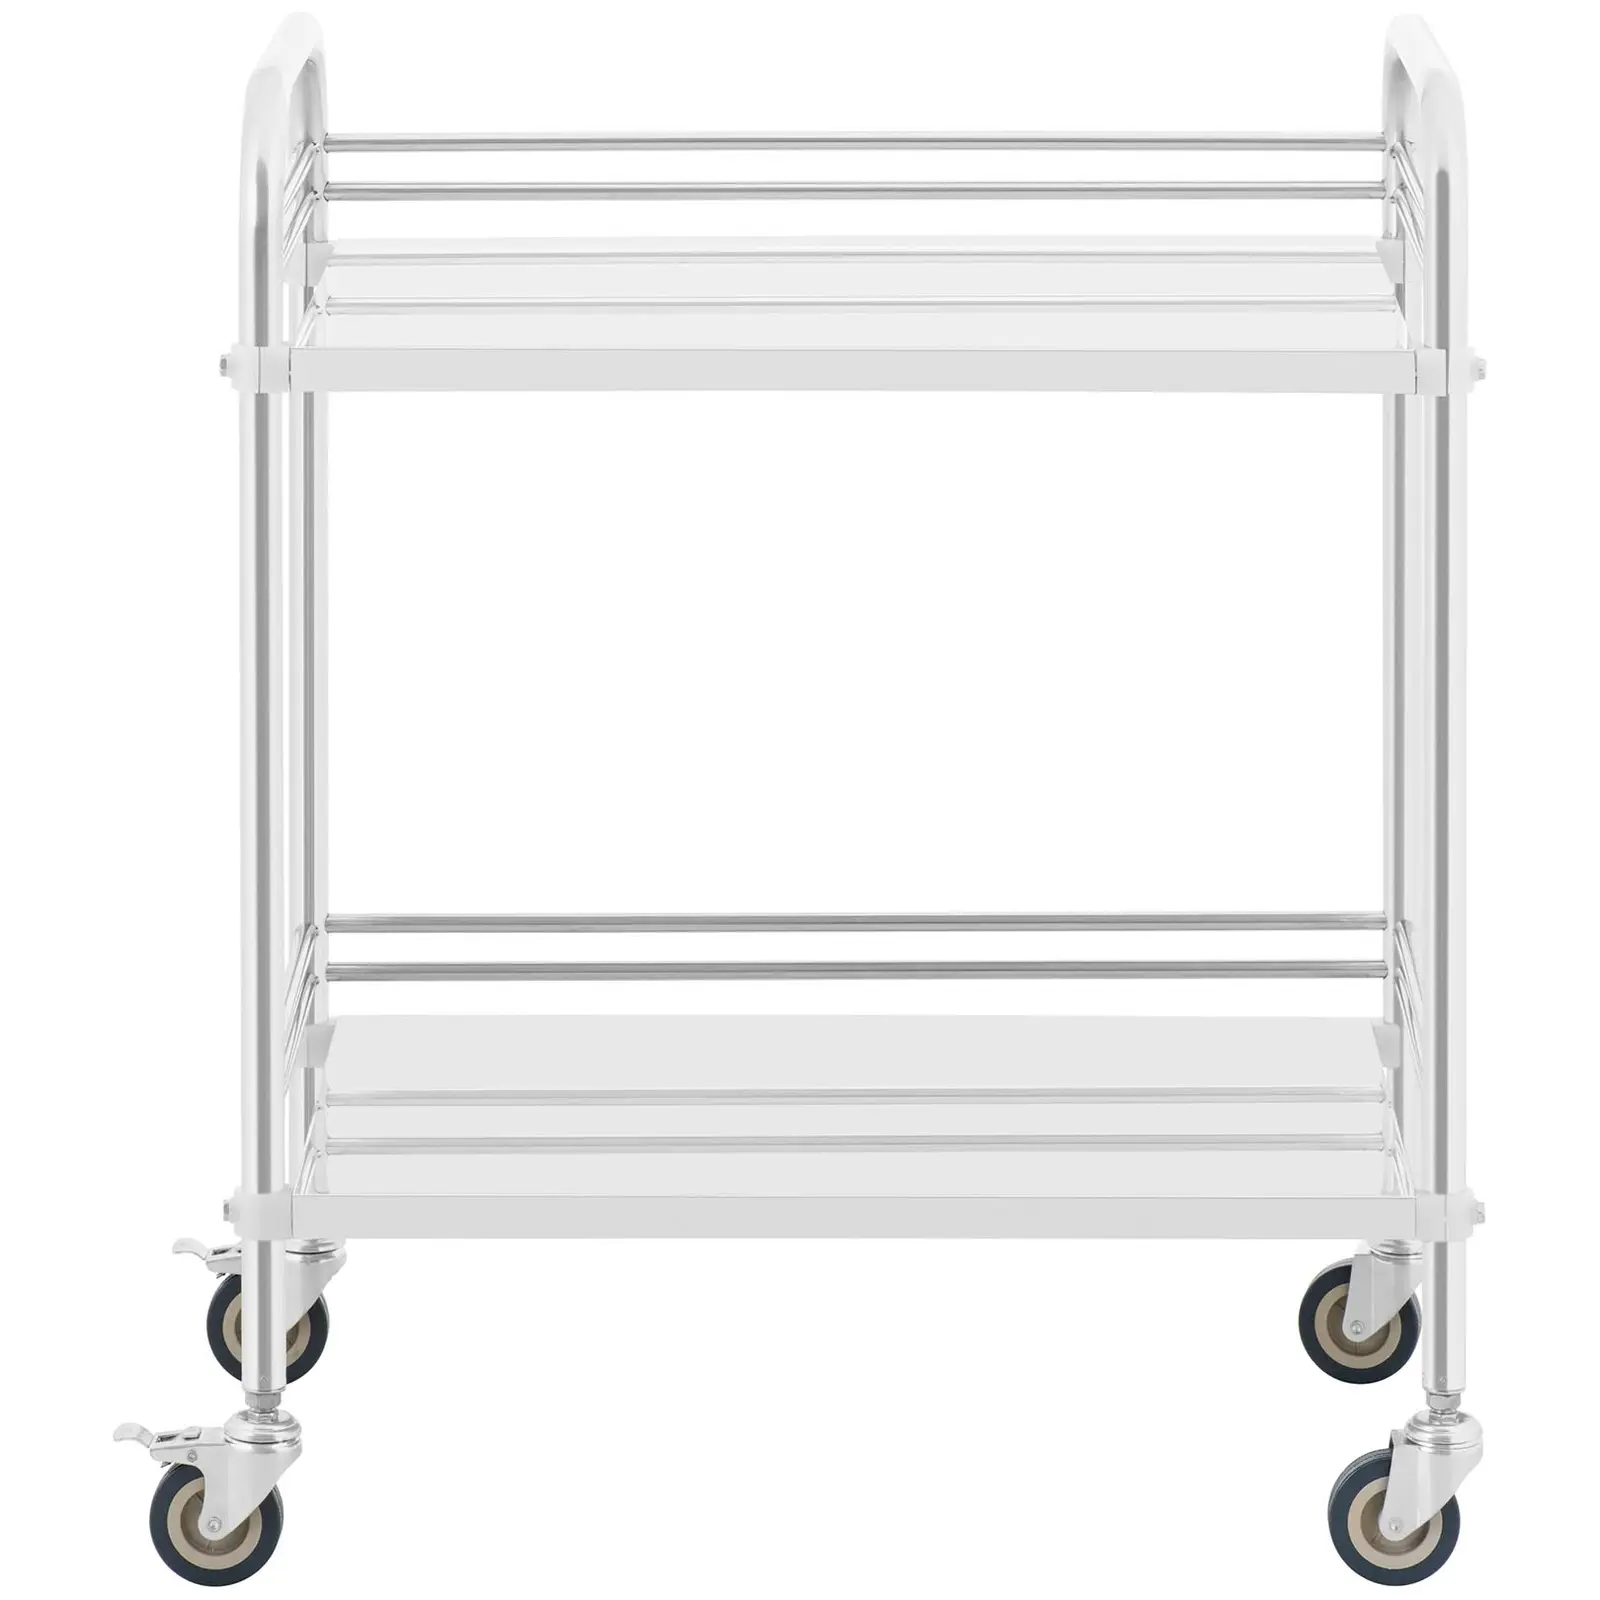 Factory second Laboratory Trolley - stainless steel - 2 shelves each 63 x 40 x 12.5 cm - 20 kg